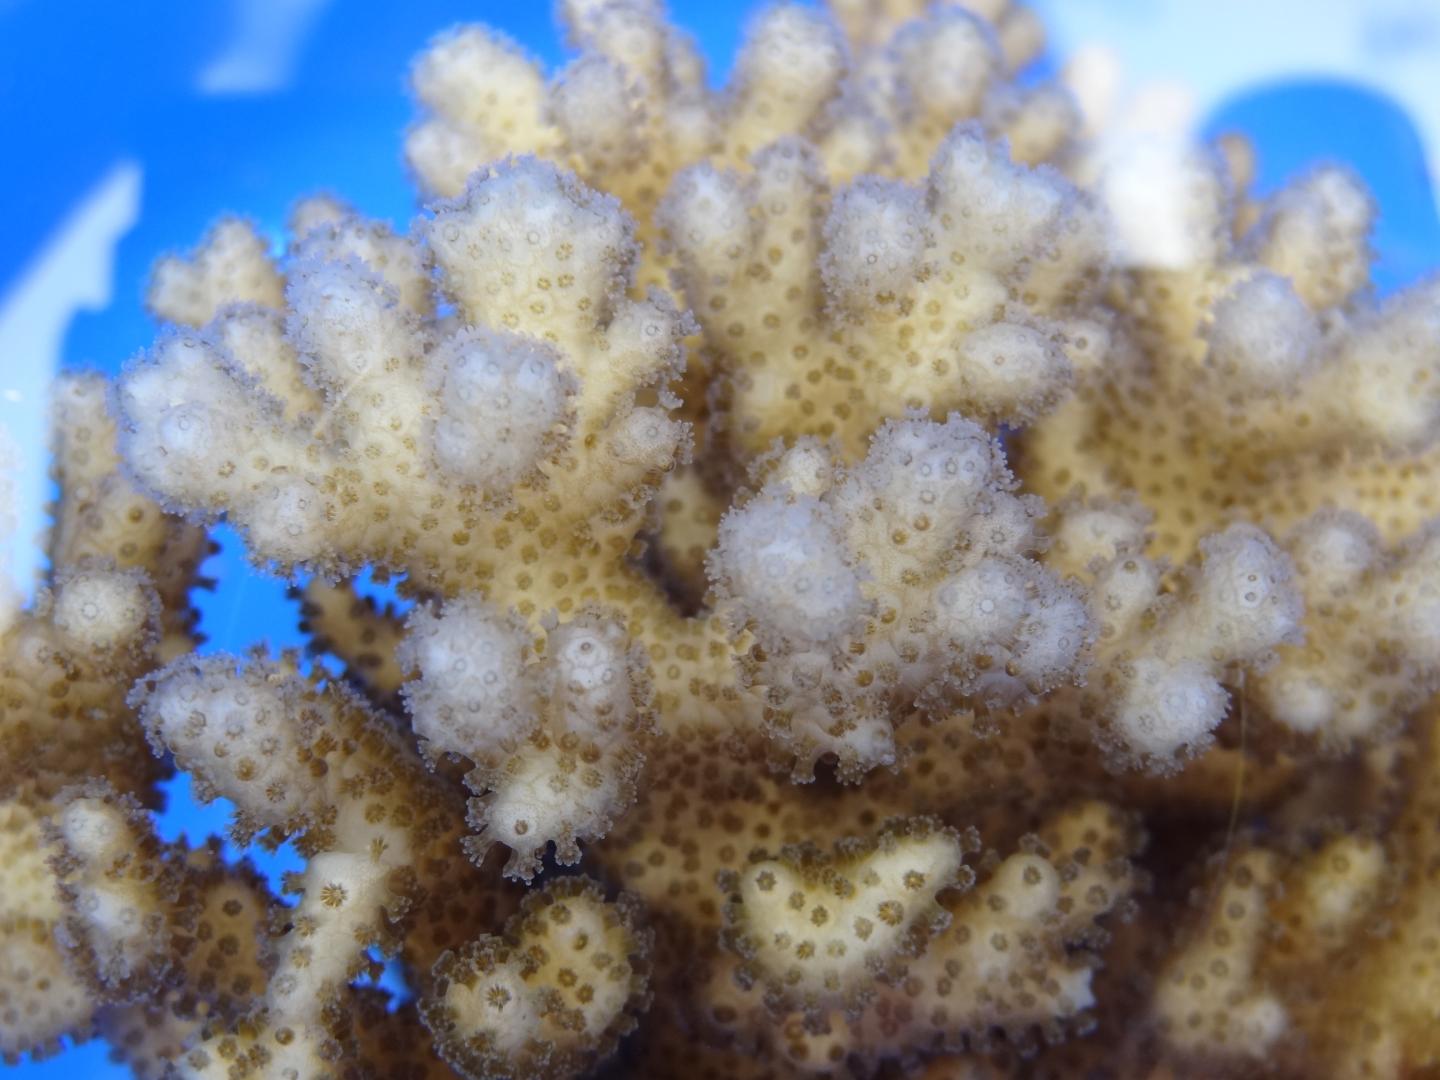 Adult Coral